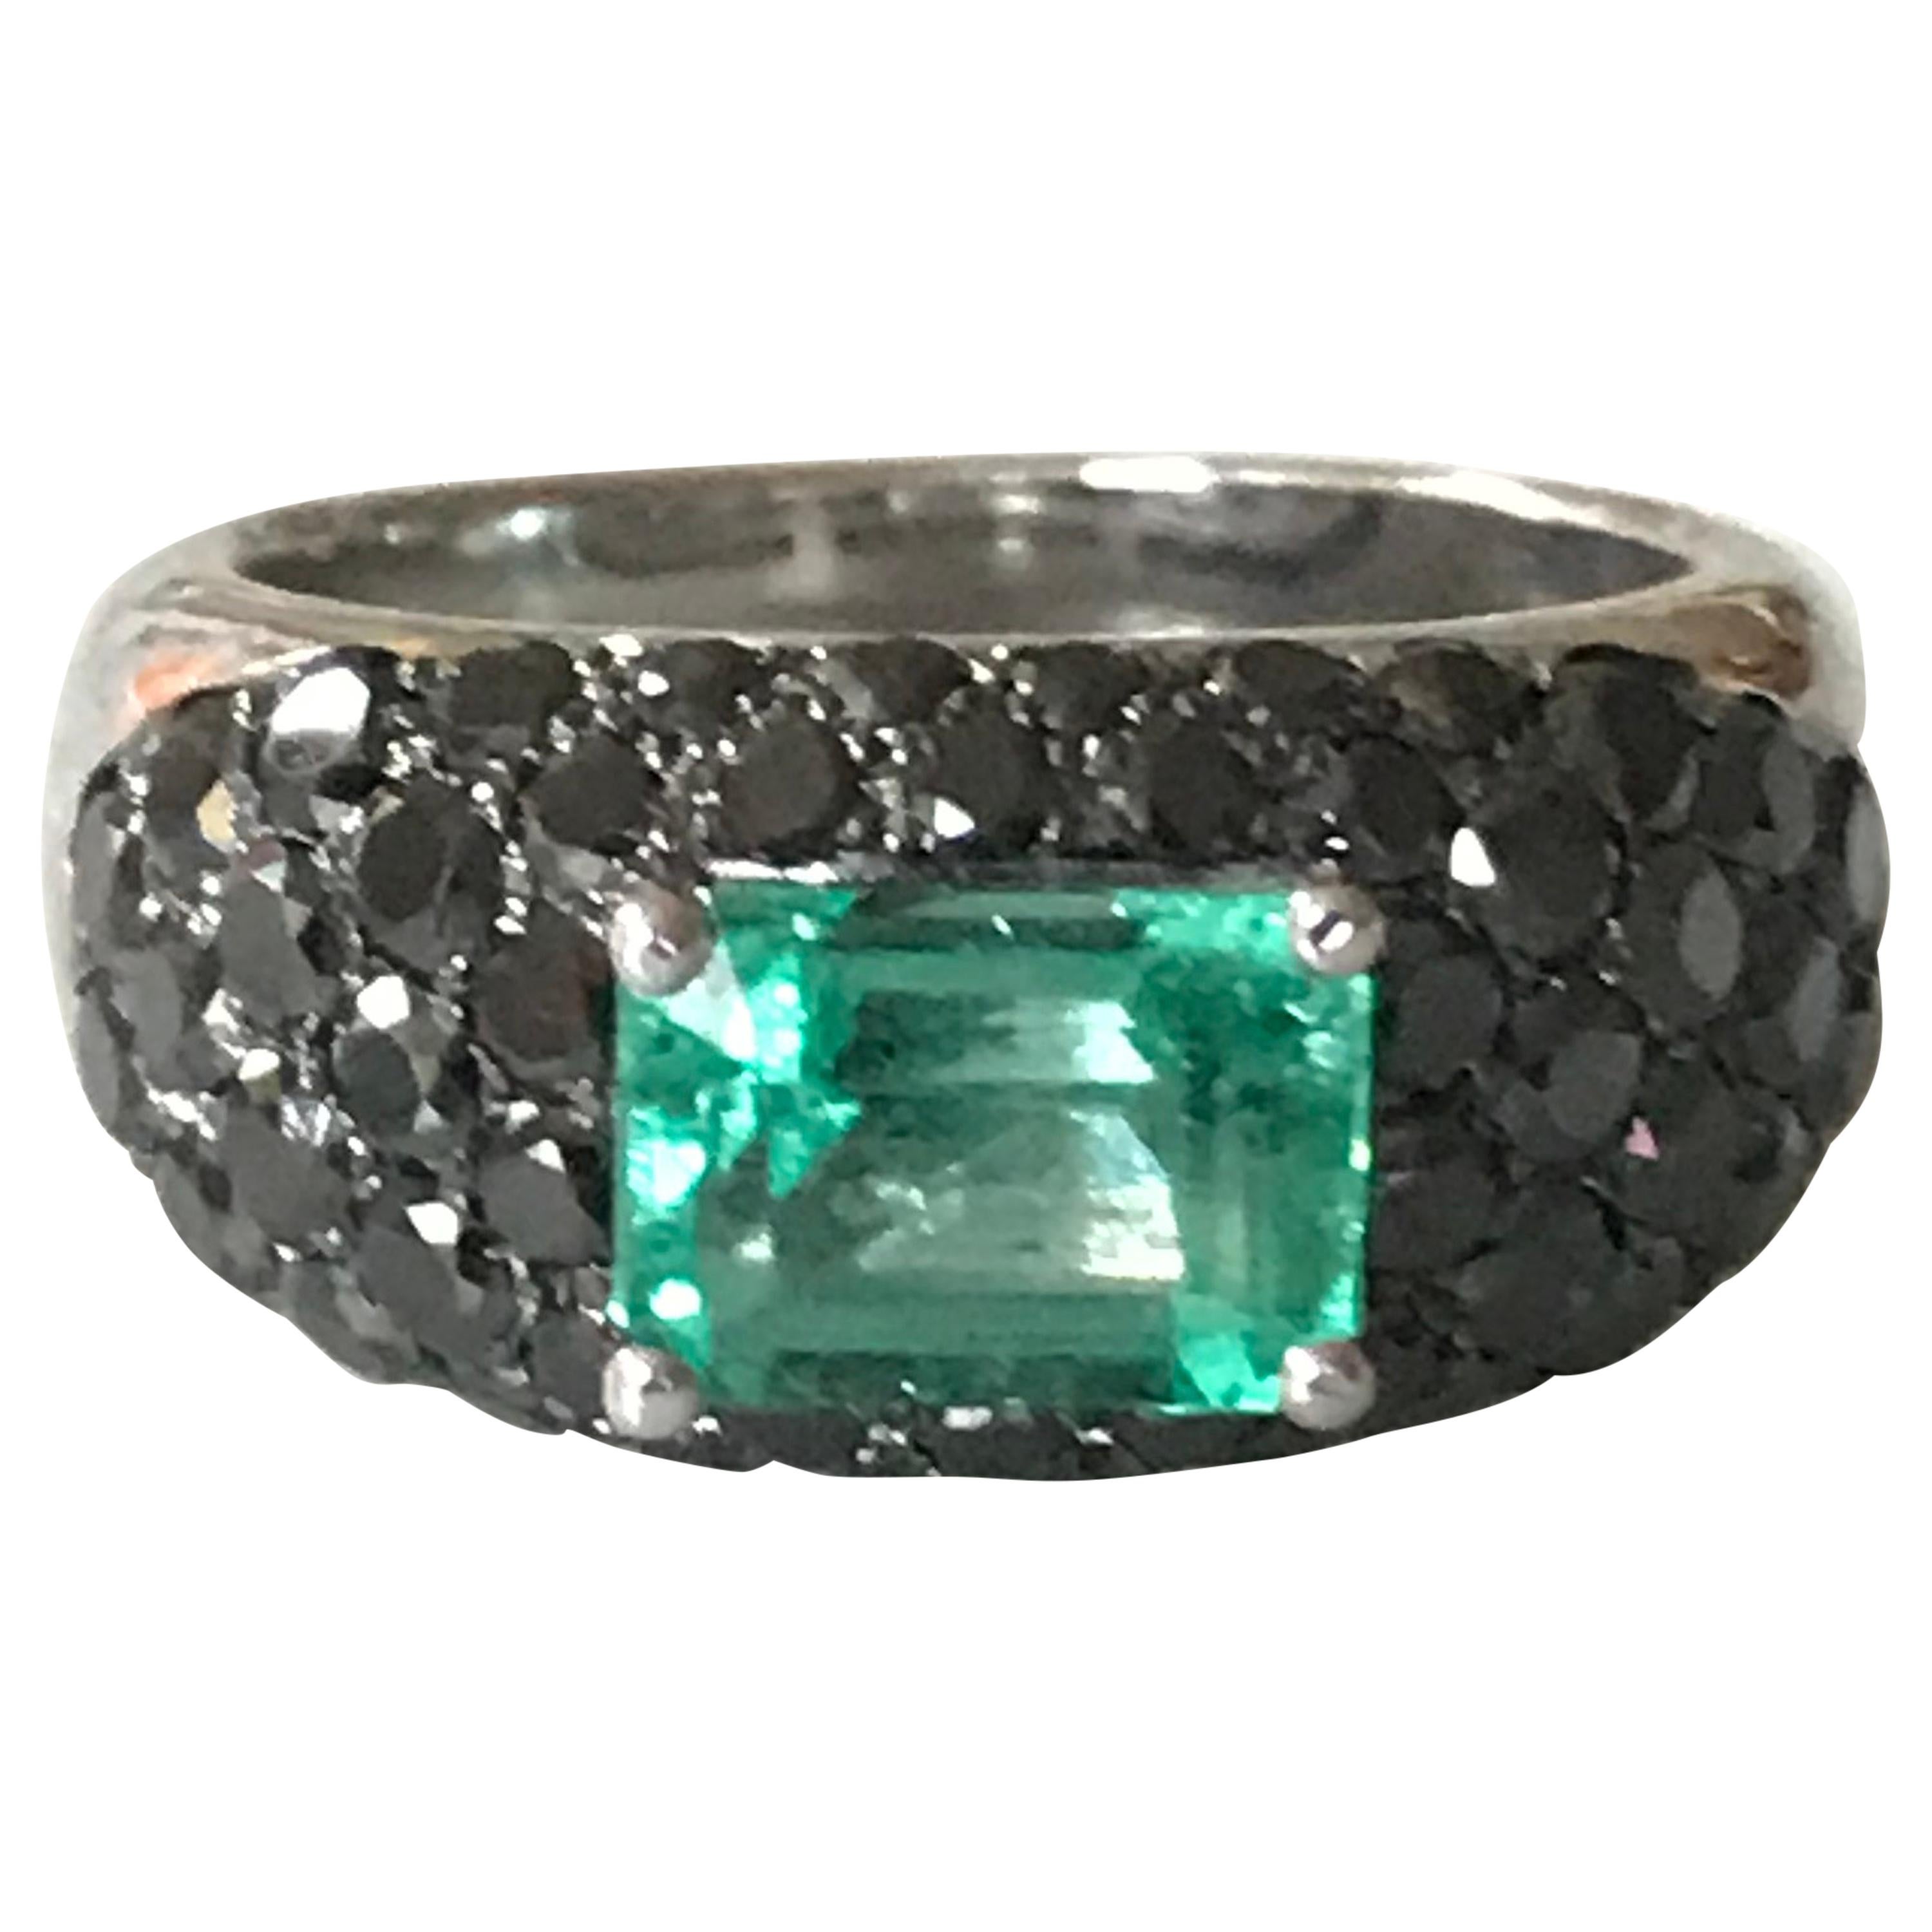 30 Carat Columbian Emerald Ring with Pyrite Inclusion For Sale at 1stDibs